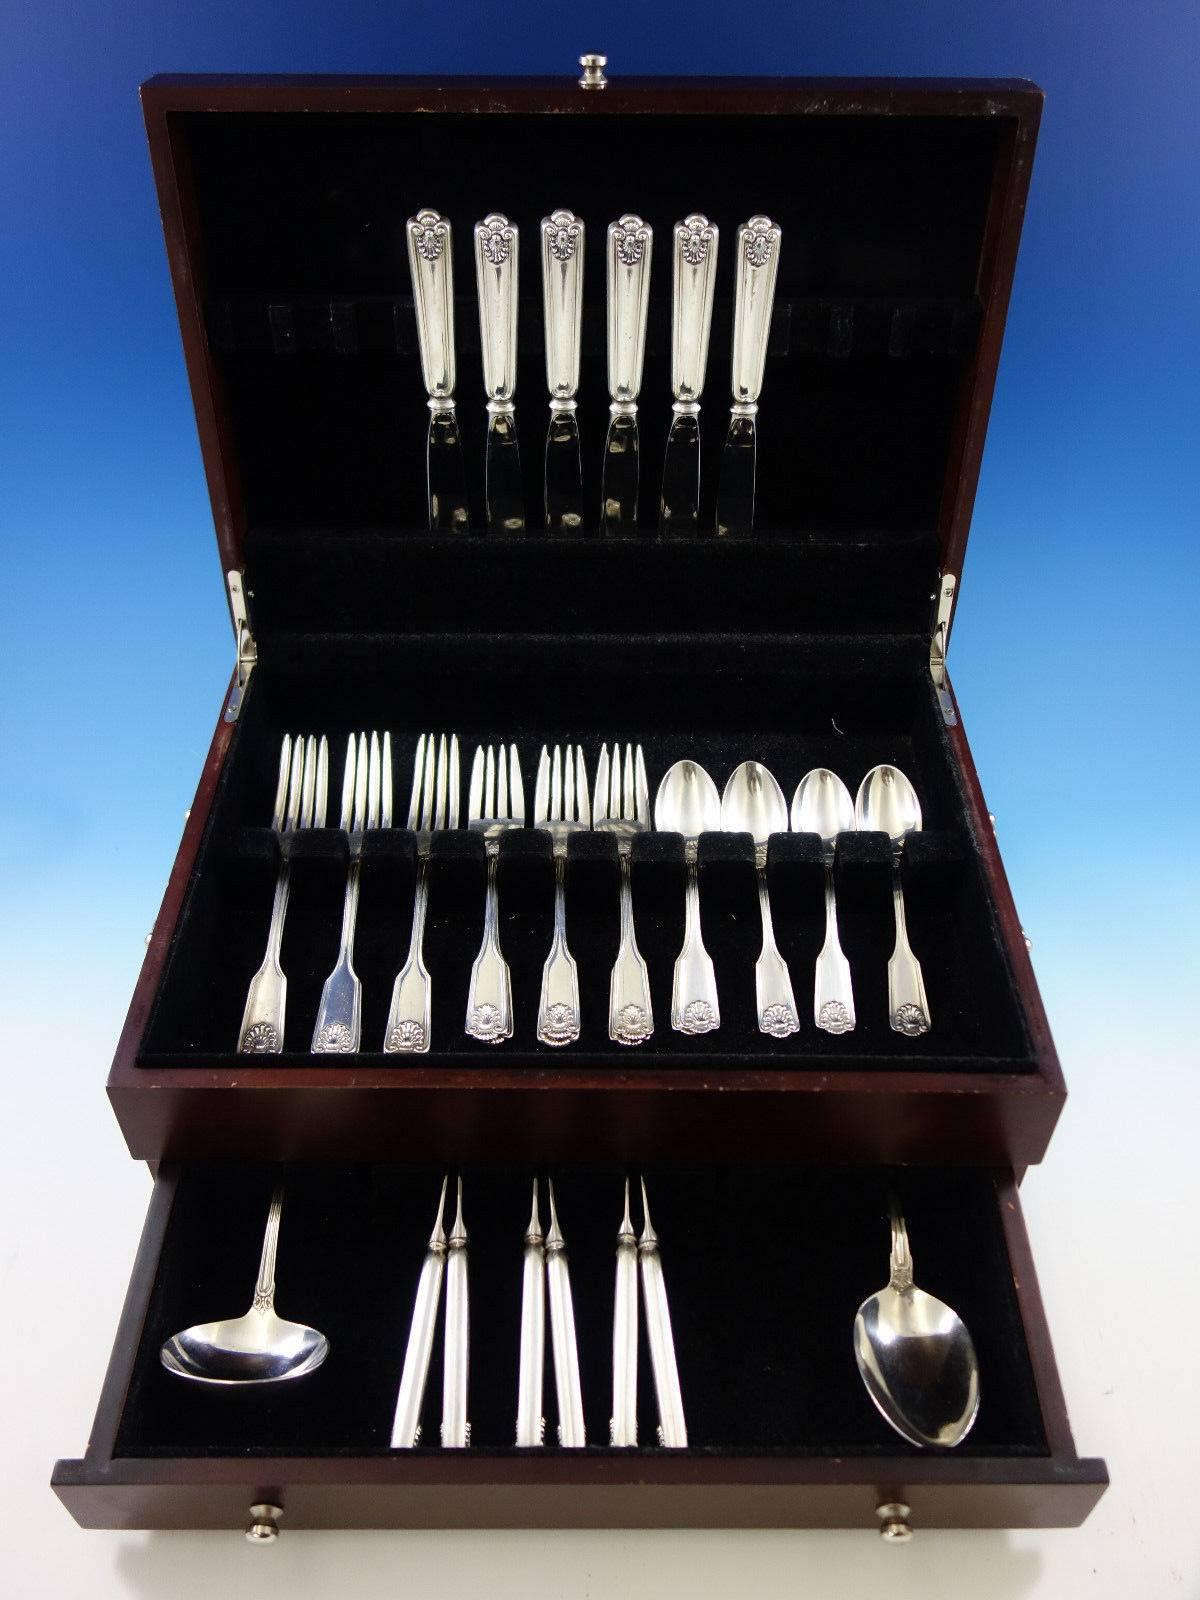 Fiddle Sh
ell by Frank Smith sterling silver flatware set of 32 pieces. Great starter set! This set includes: 

Six knives, 8 5/8